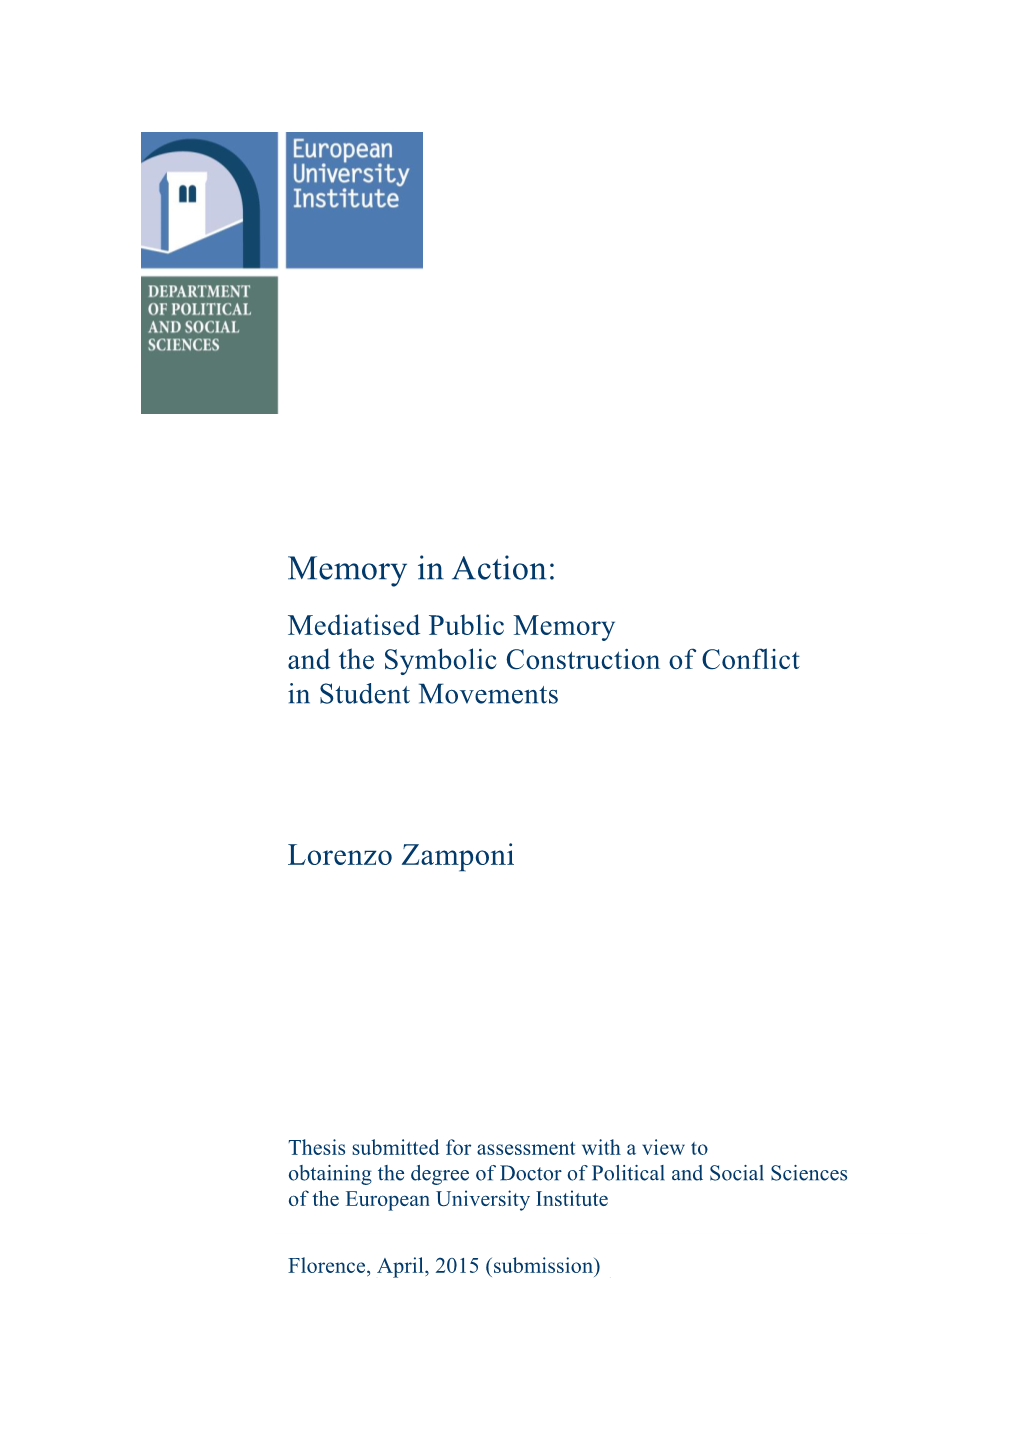 Memory in Action: Mediatised Public Memory and the Symbolic Construction of Conflict in Student Movements